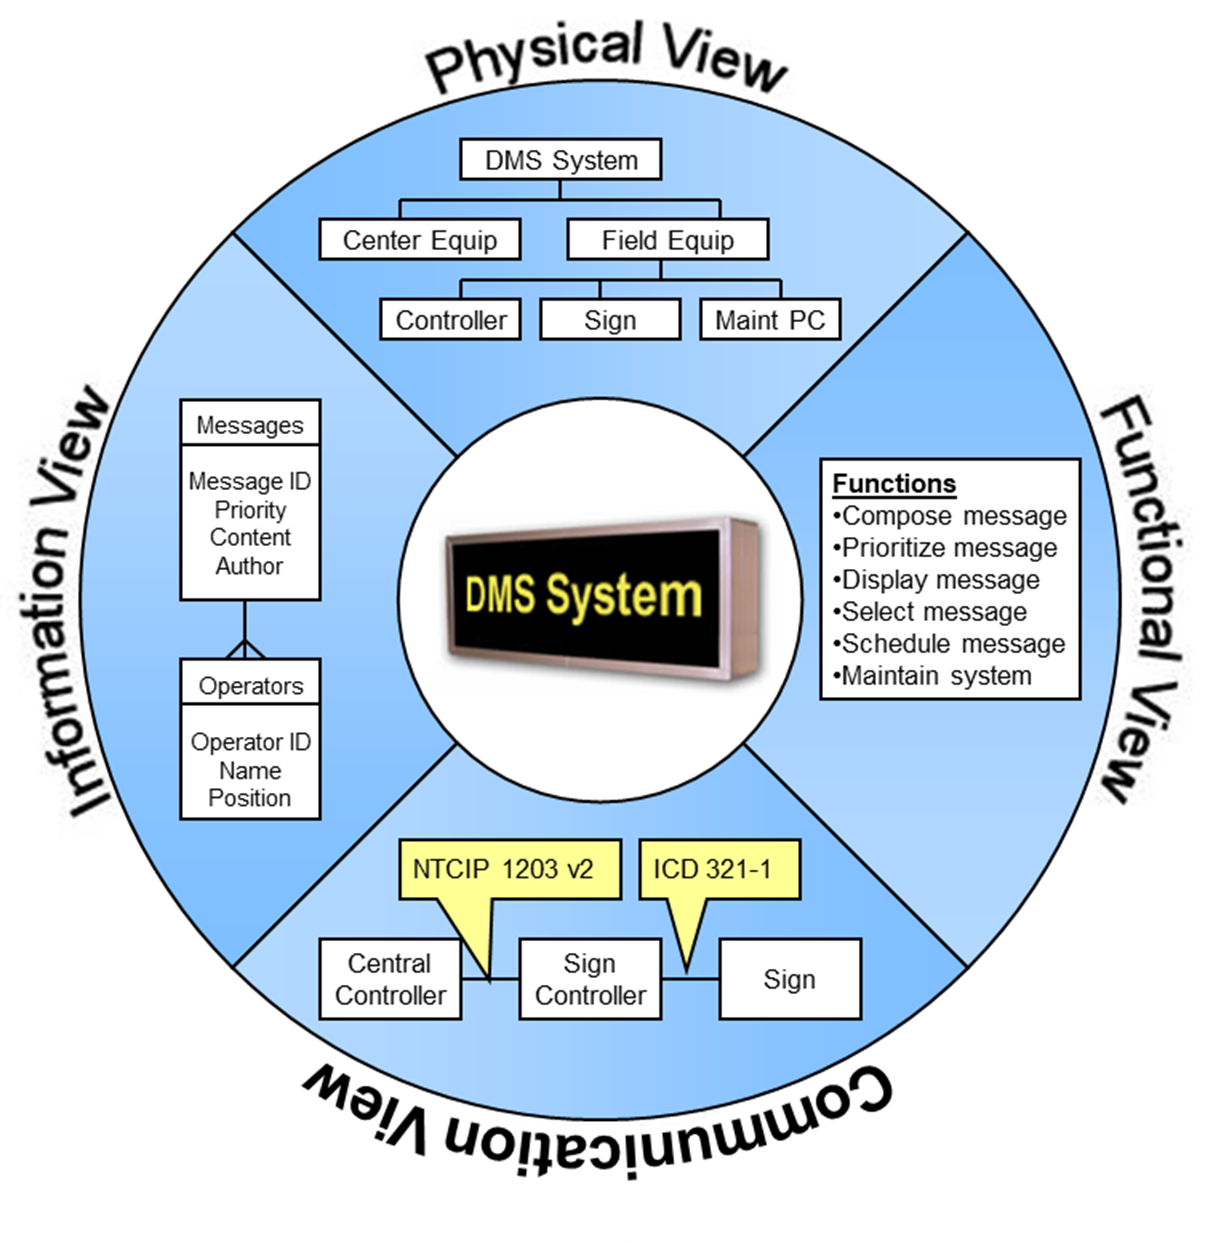 Figure illustrates four views of high level design for a DMS system- Physical, Functional, Information, and Communication as described in the previous paragraphs.